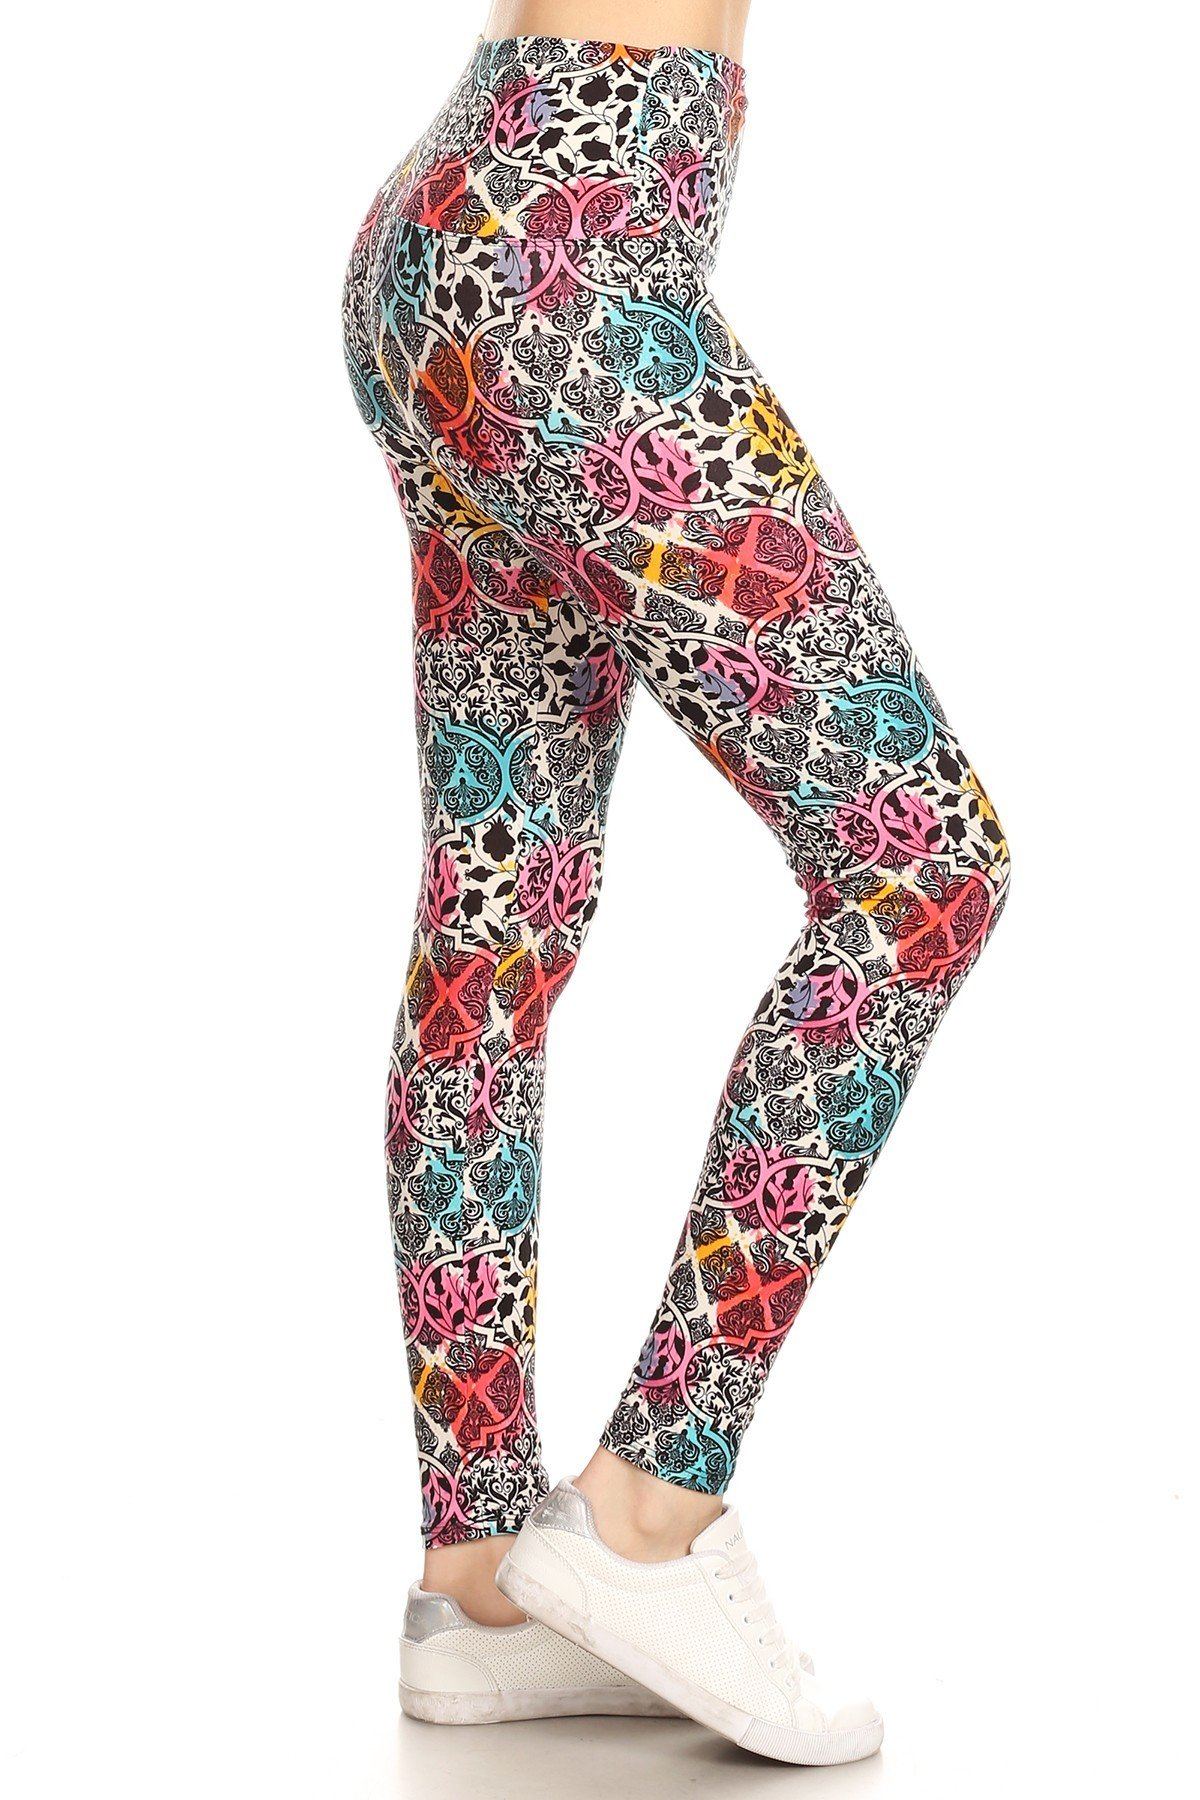 Yoga Style Banded Lined Printed Knit Leggings 